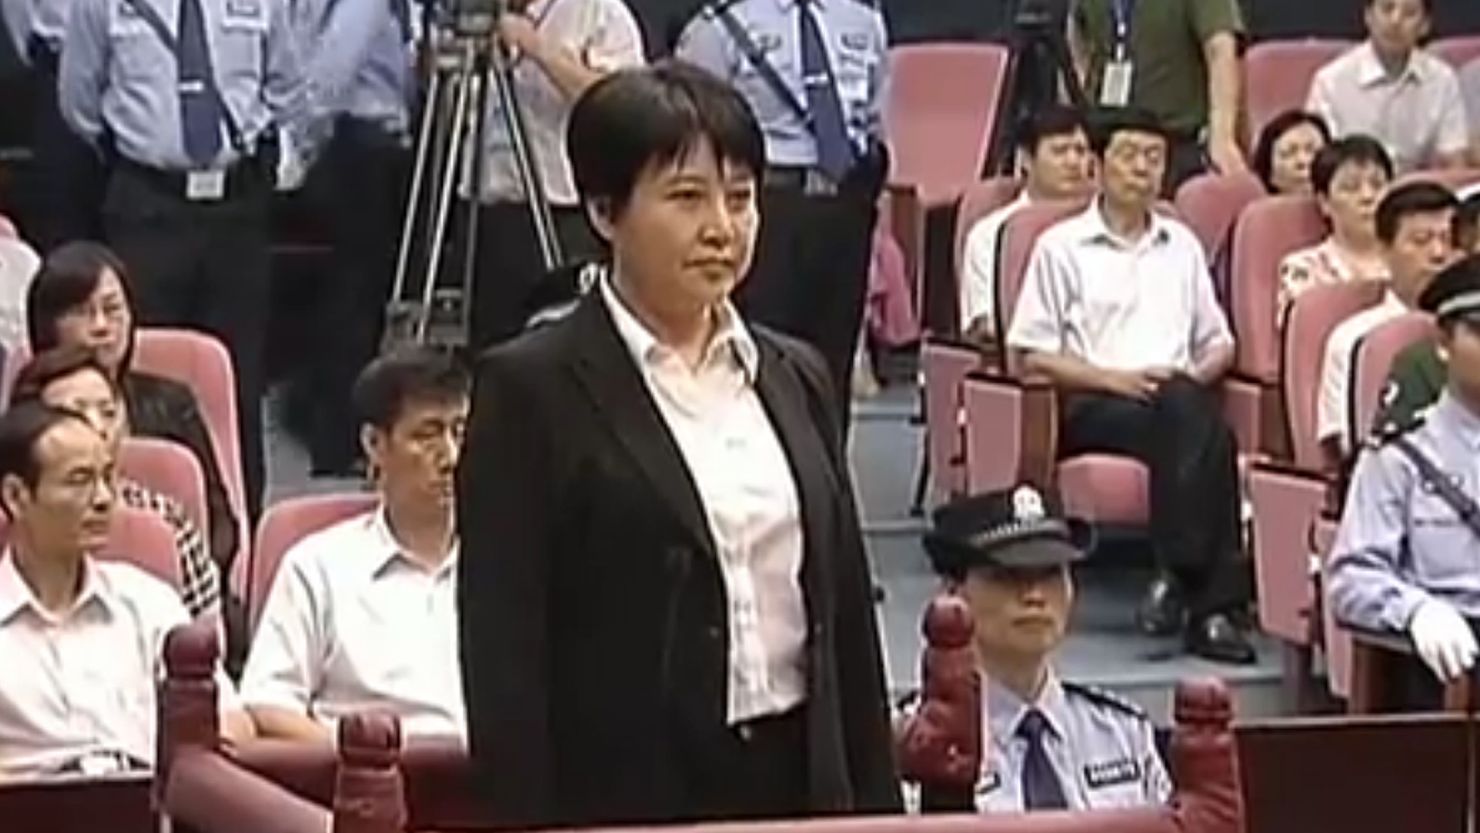 This frame grab taken from CCTV video shows Gu Kailai, the wife of disgraced Chinese politician Bo Xilai, facing the court during her murder trial in Hefei on August 9, 2012.